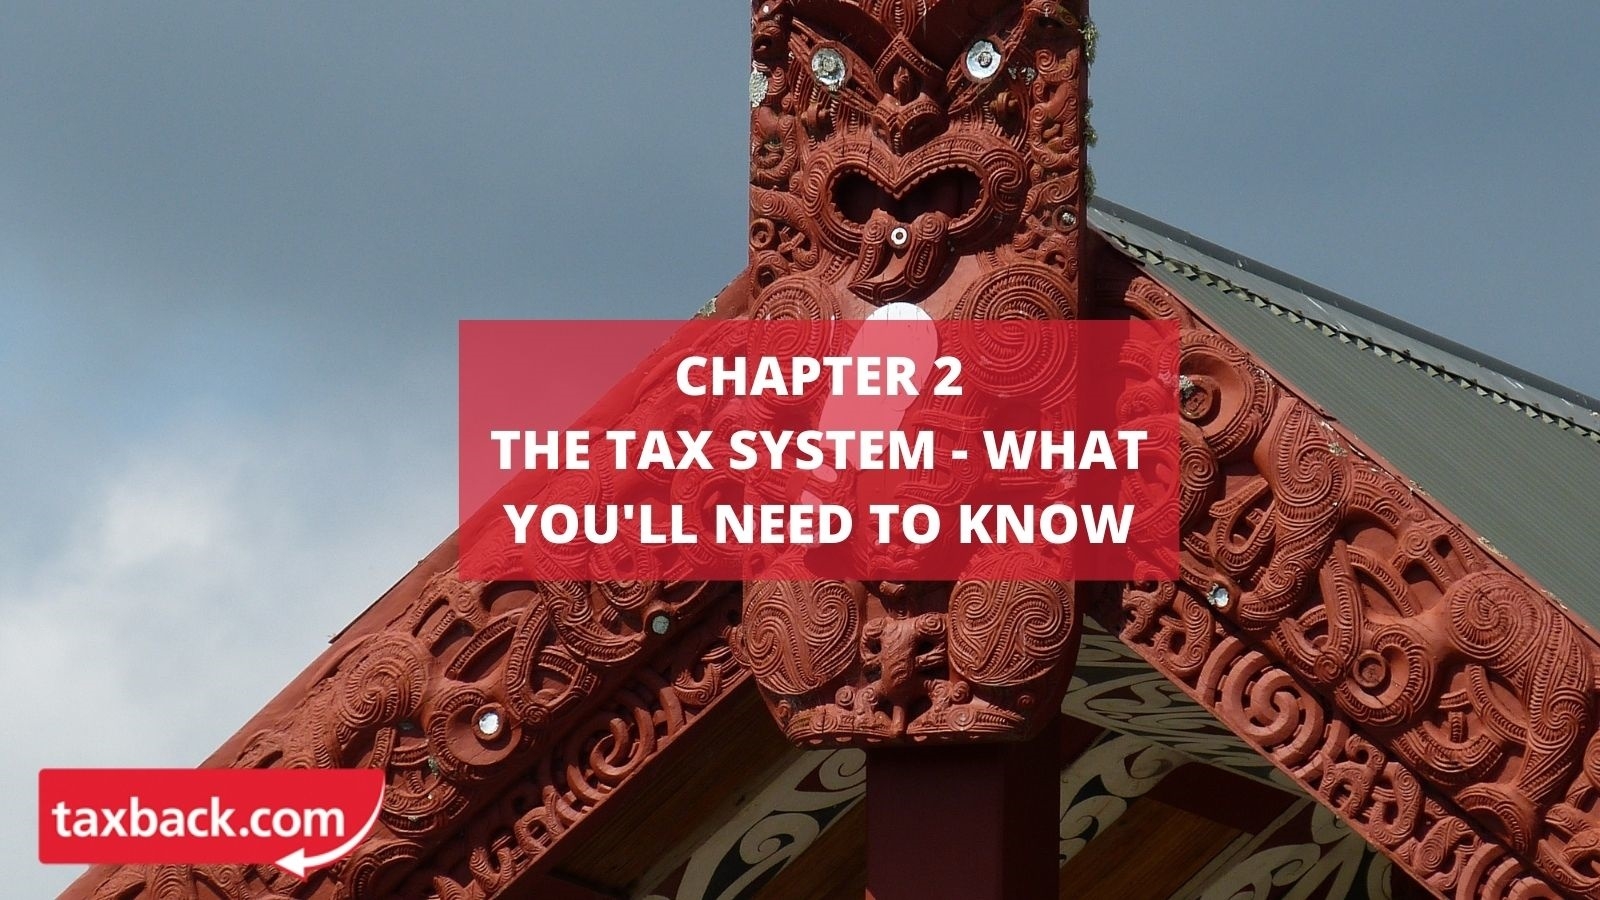 Chapter 2: The Tax System - What You'll Need to Know